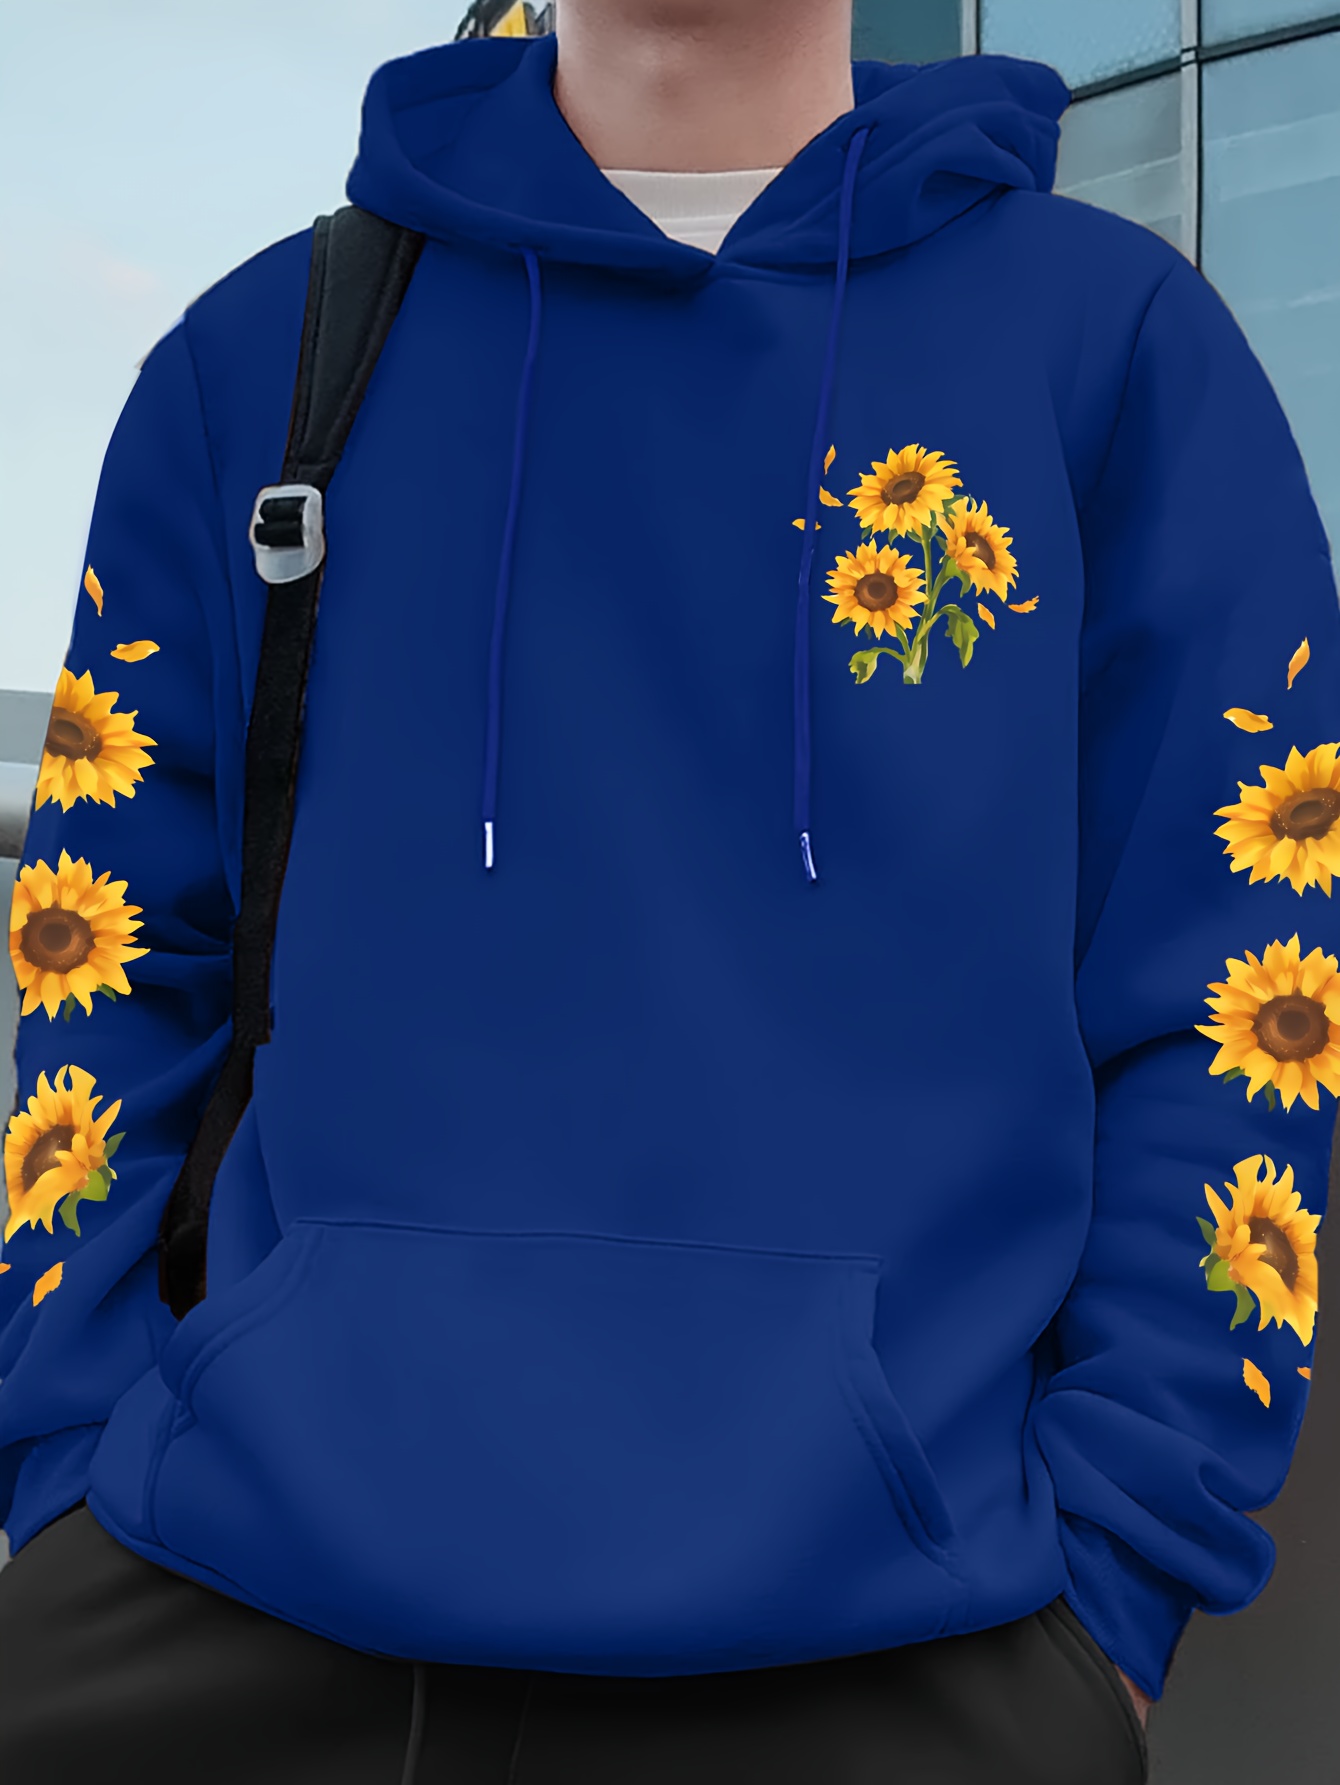 sunflower print mens pullover round neck hoodies with kangaroo pocket long sleeve hooded sweatshirt loose casual top for autumn winter mens clothing as gifts details 20